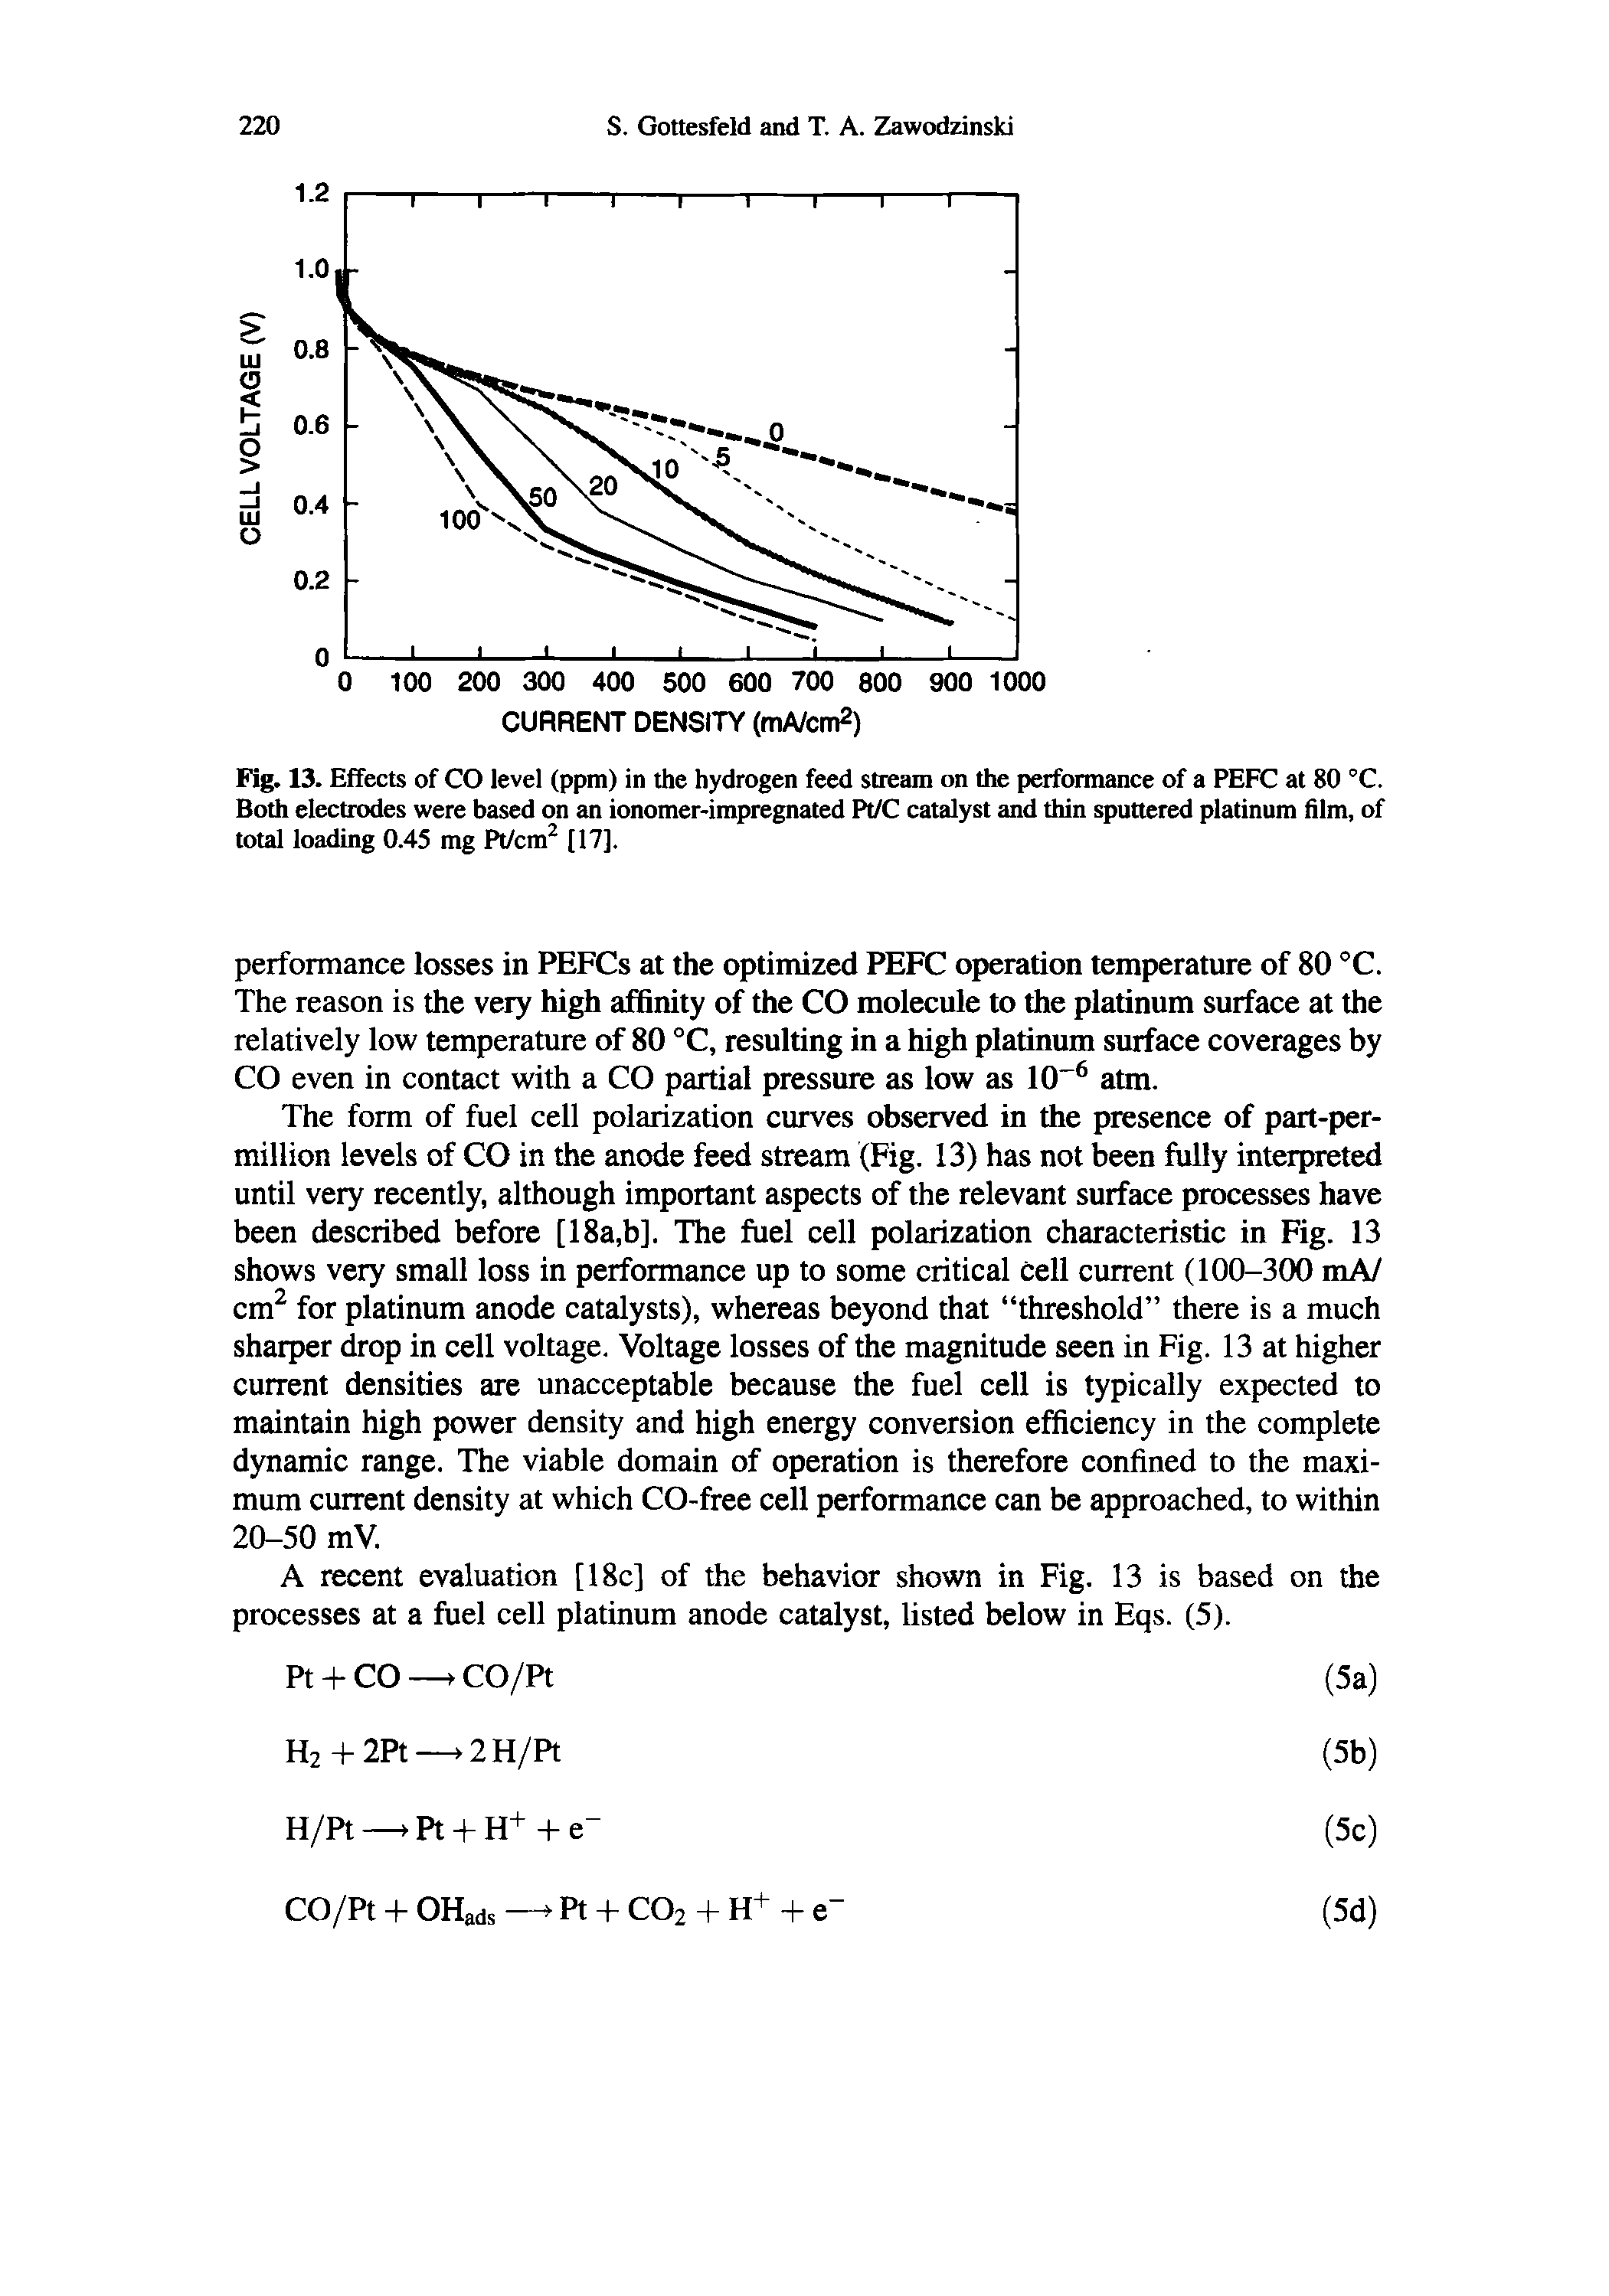 Fig. 13. Effects of CO level (ppm) in the hydrogen feed stream on the performance of a PEFC at 80 °C. Both electrodes were based on an ionomer-impregnated Pt/C catalyst and thin sputtered platinum film, of total loading 0.45 mg Pt/cm [17].